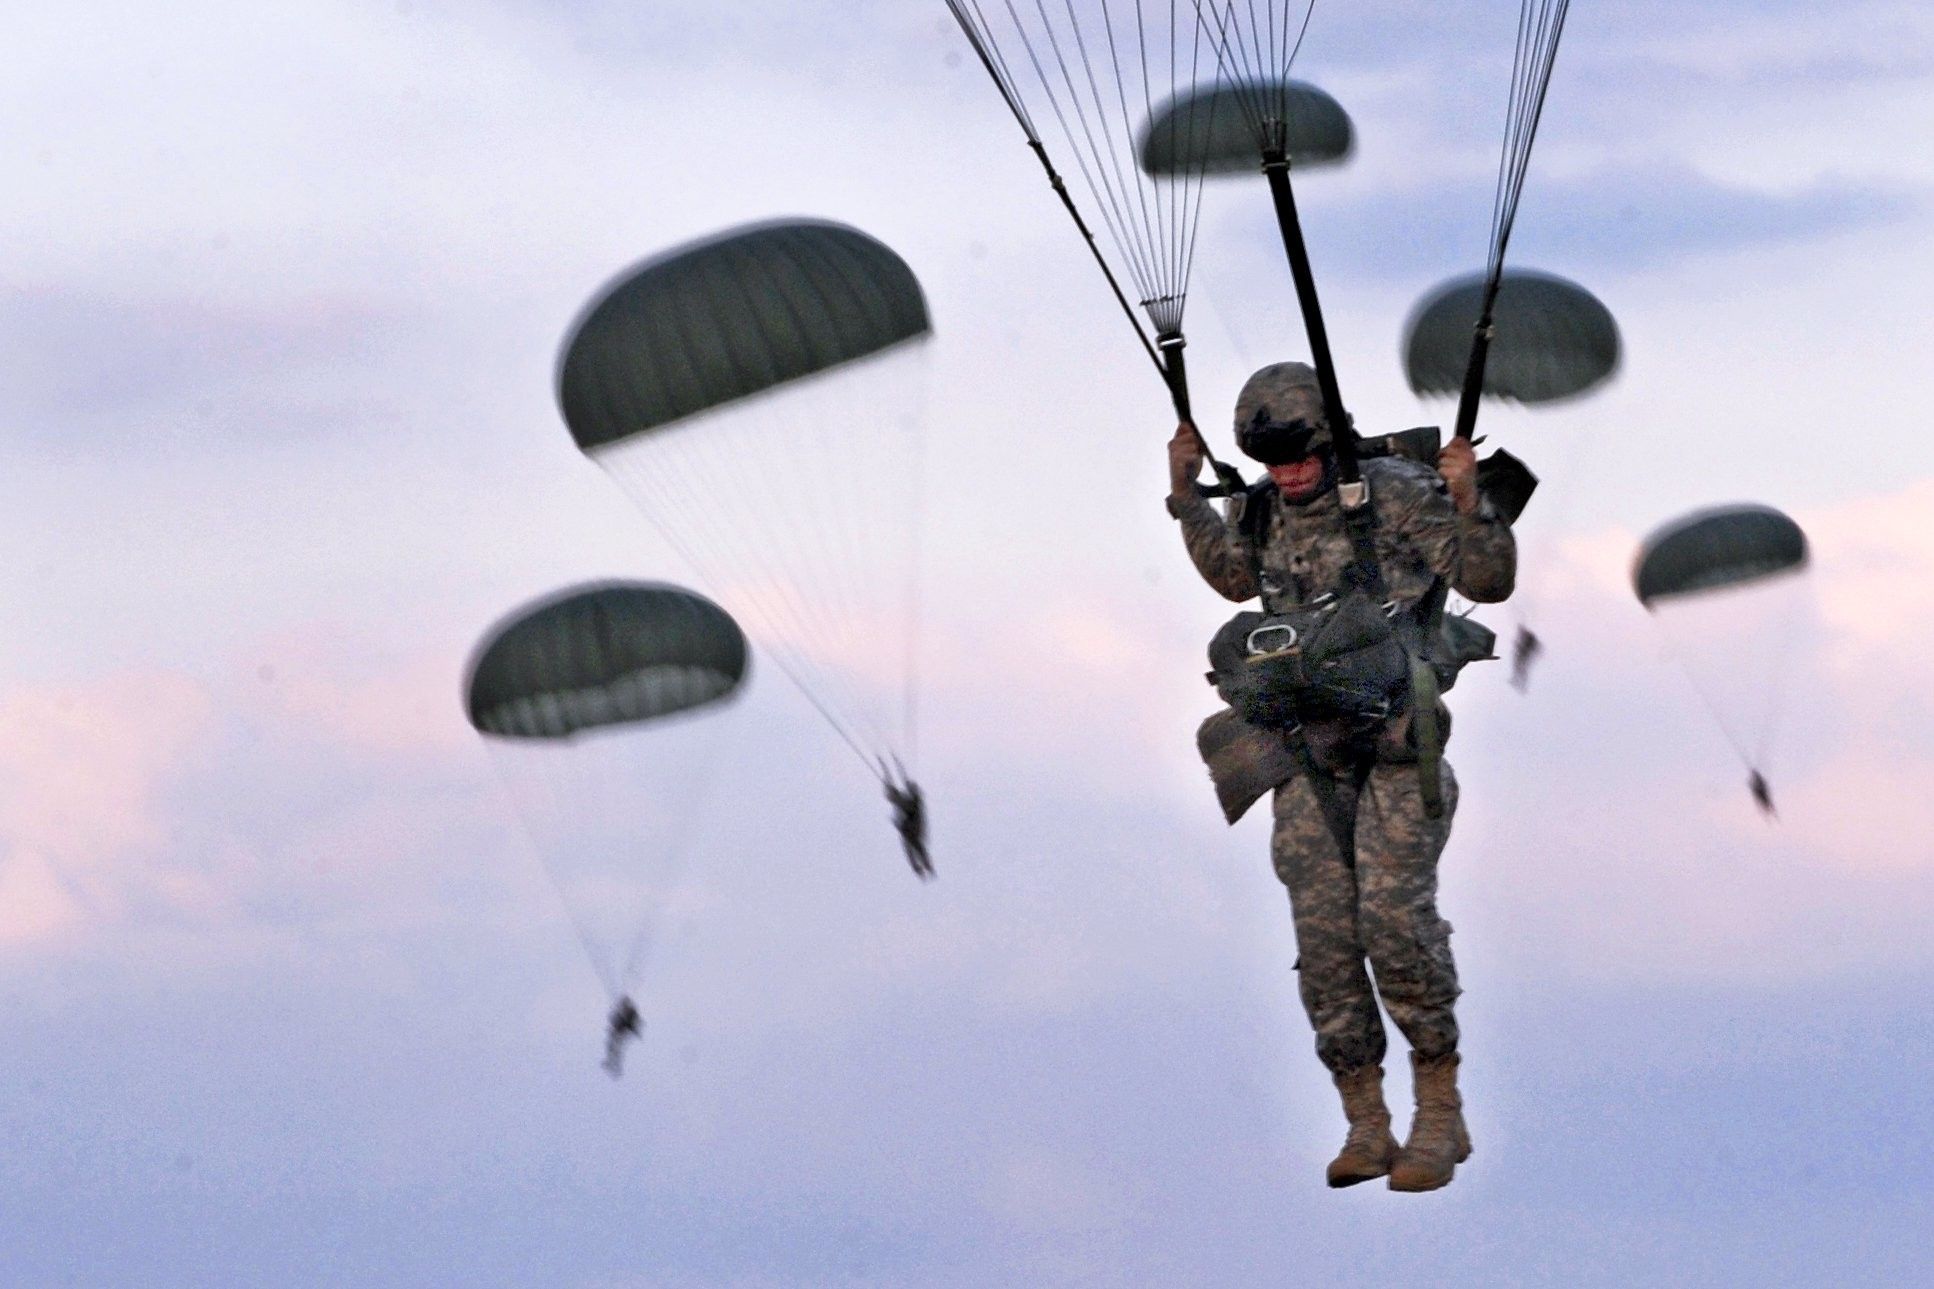 82Nd Airborne wallpaper wallpaper Collections